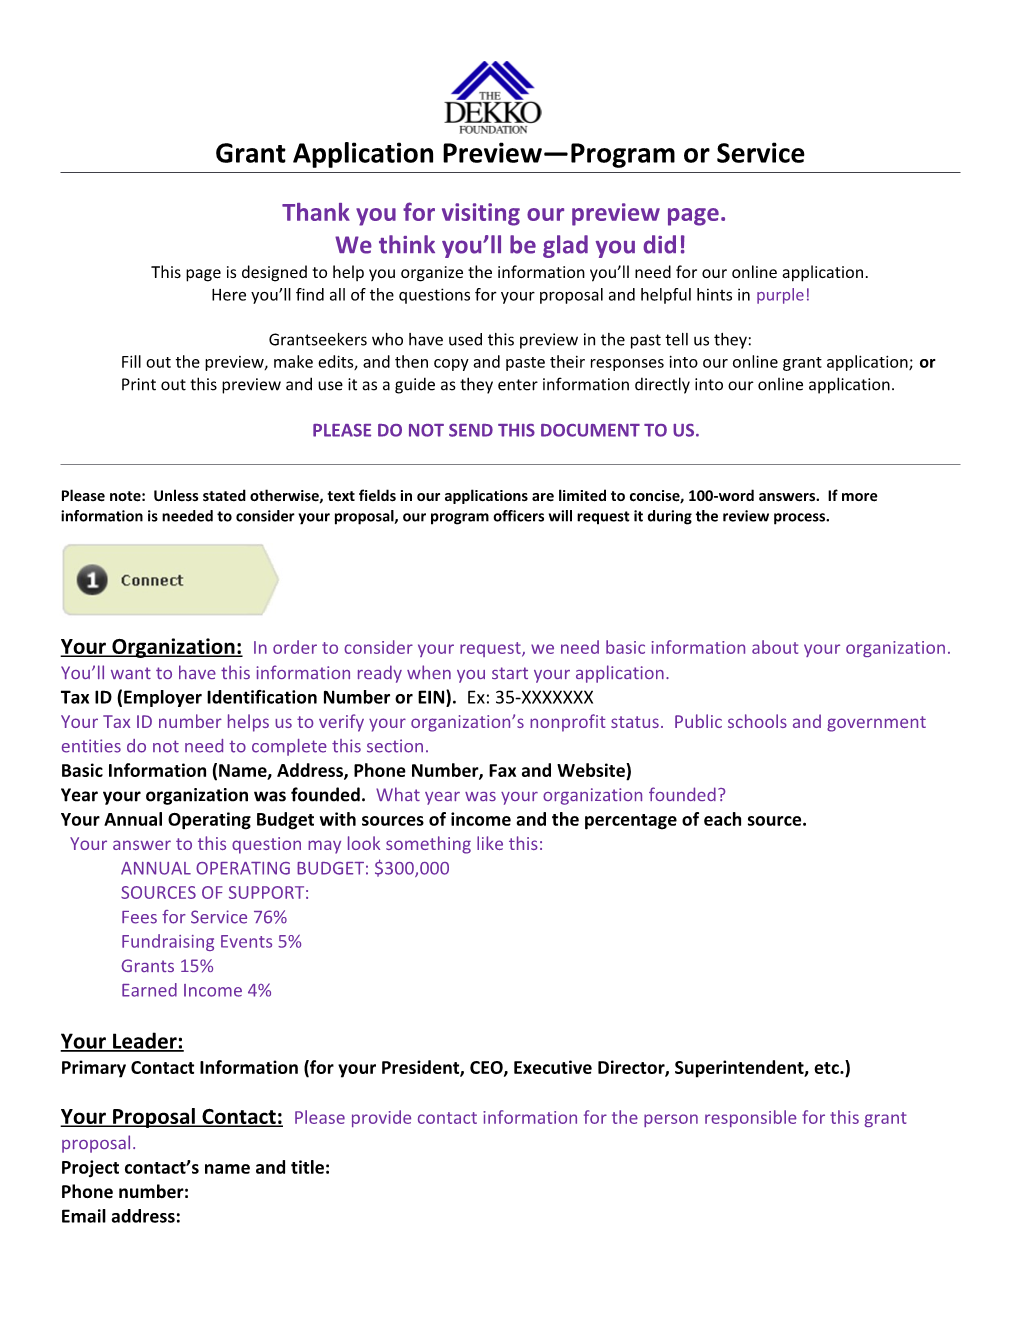 Grant Application Preview Program Or Service